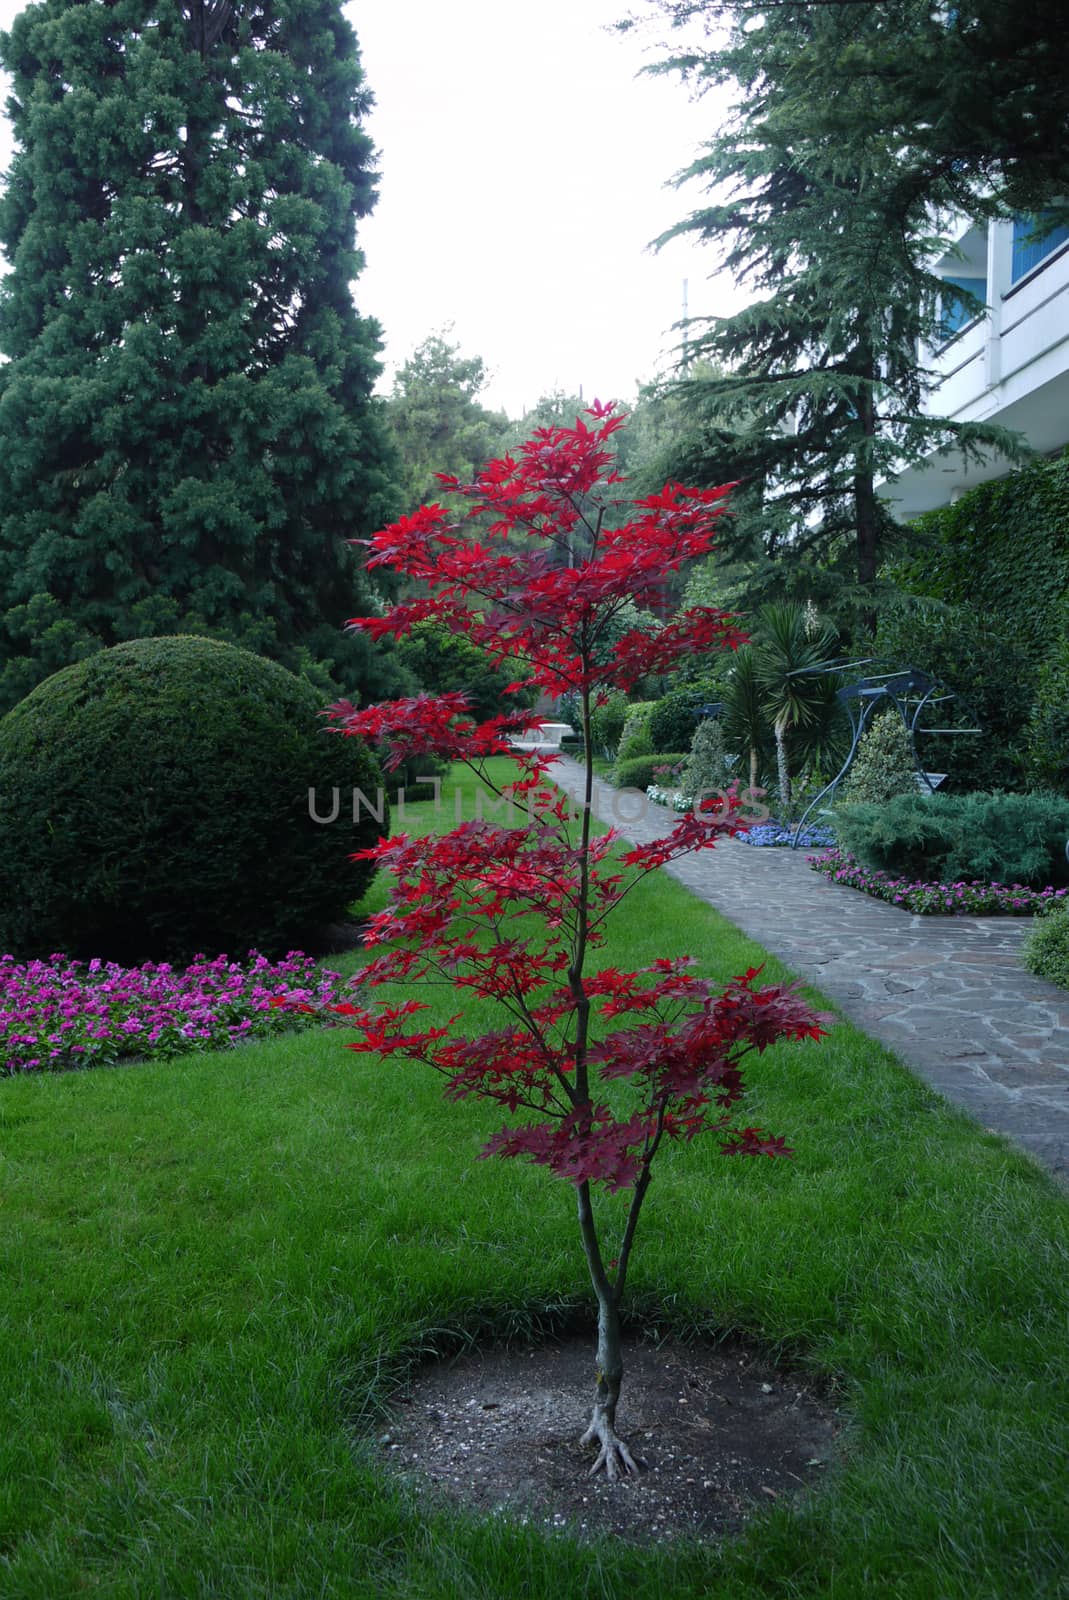 A planted young tree with small red leaves against the background of the alley leading to the white building